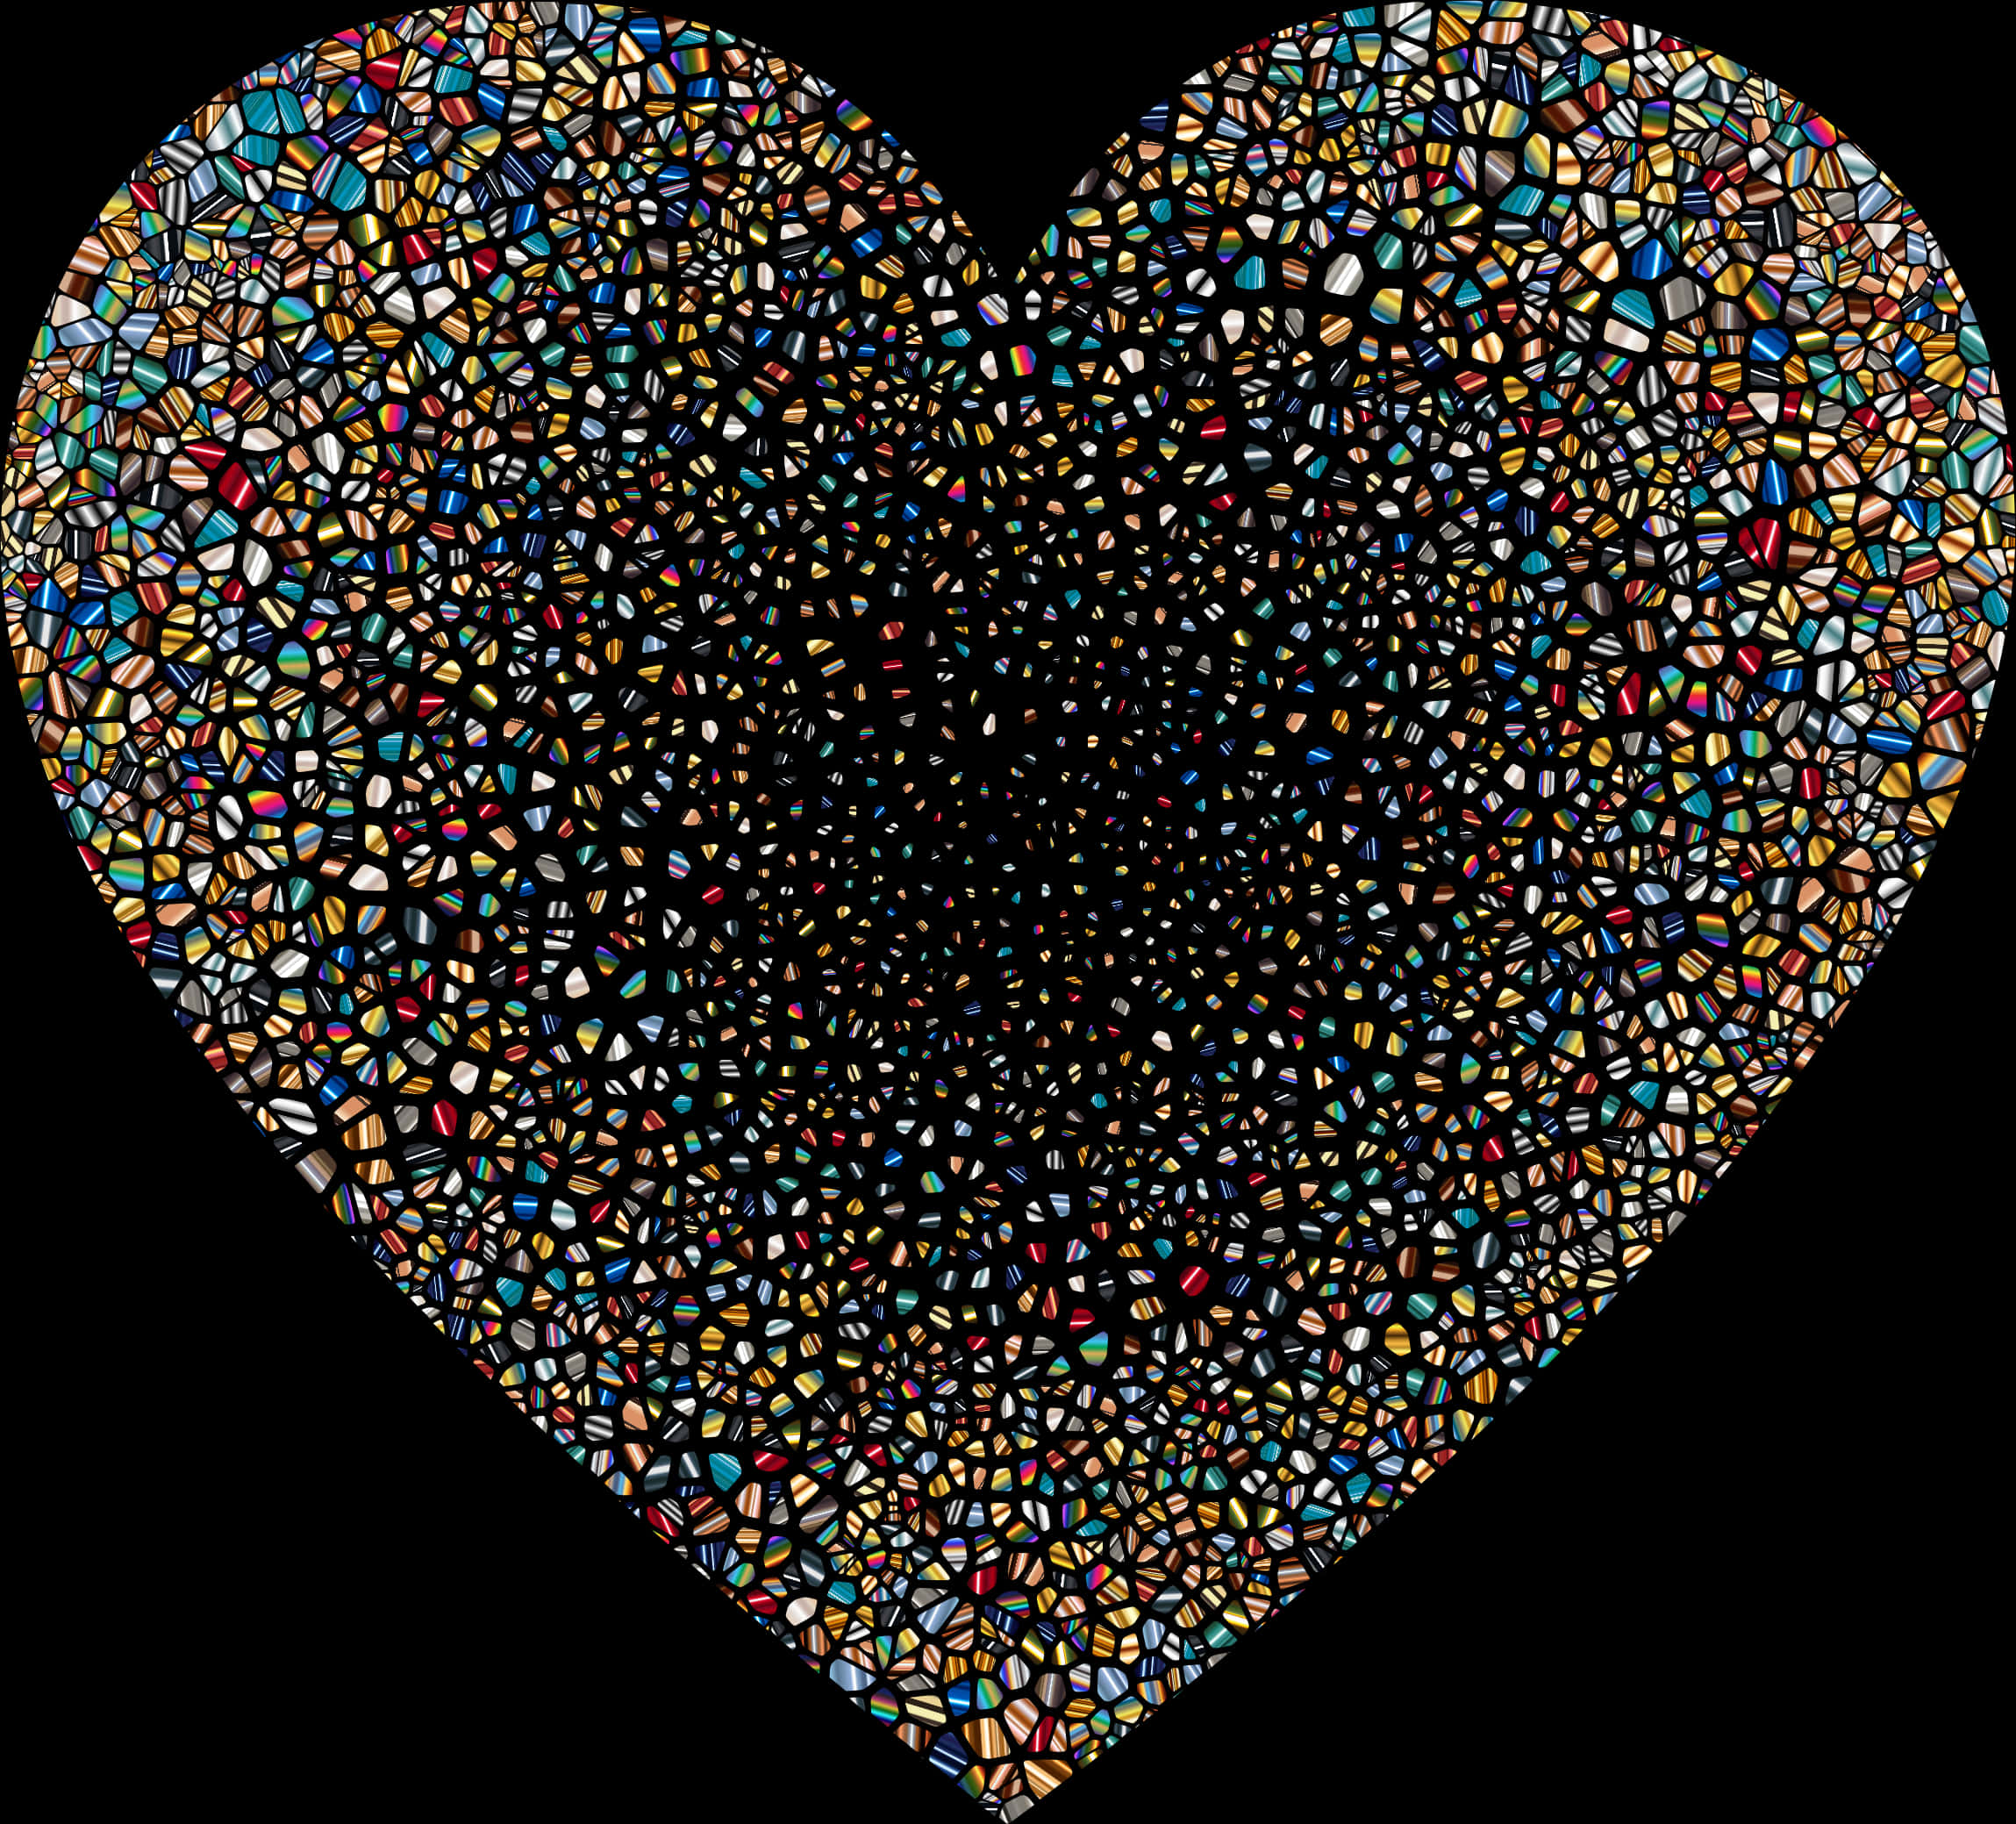 Rainbow-colored Heart Images With Transparent Background